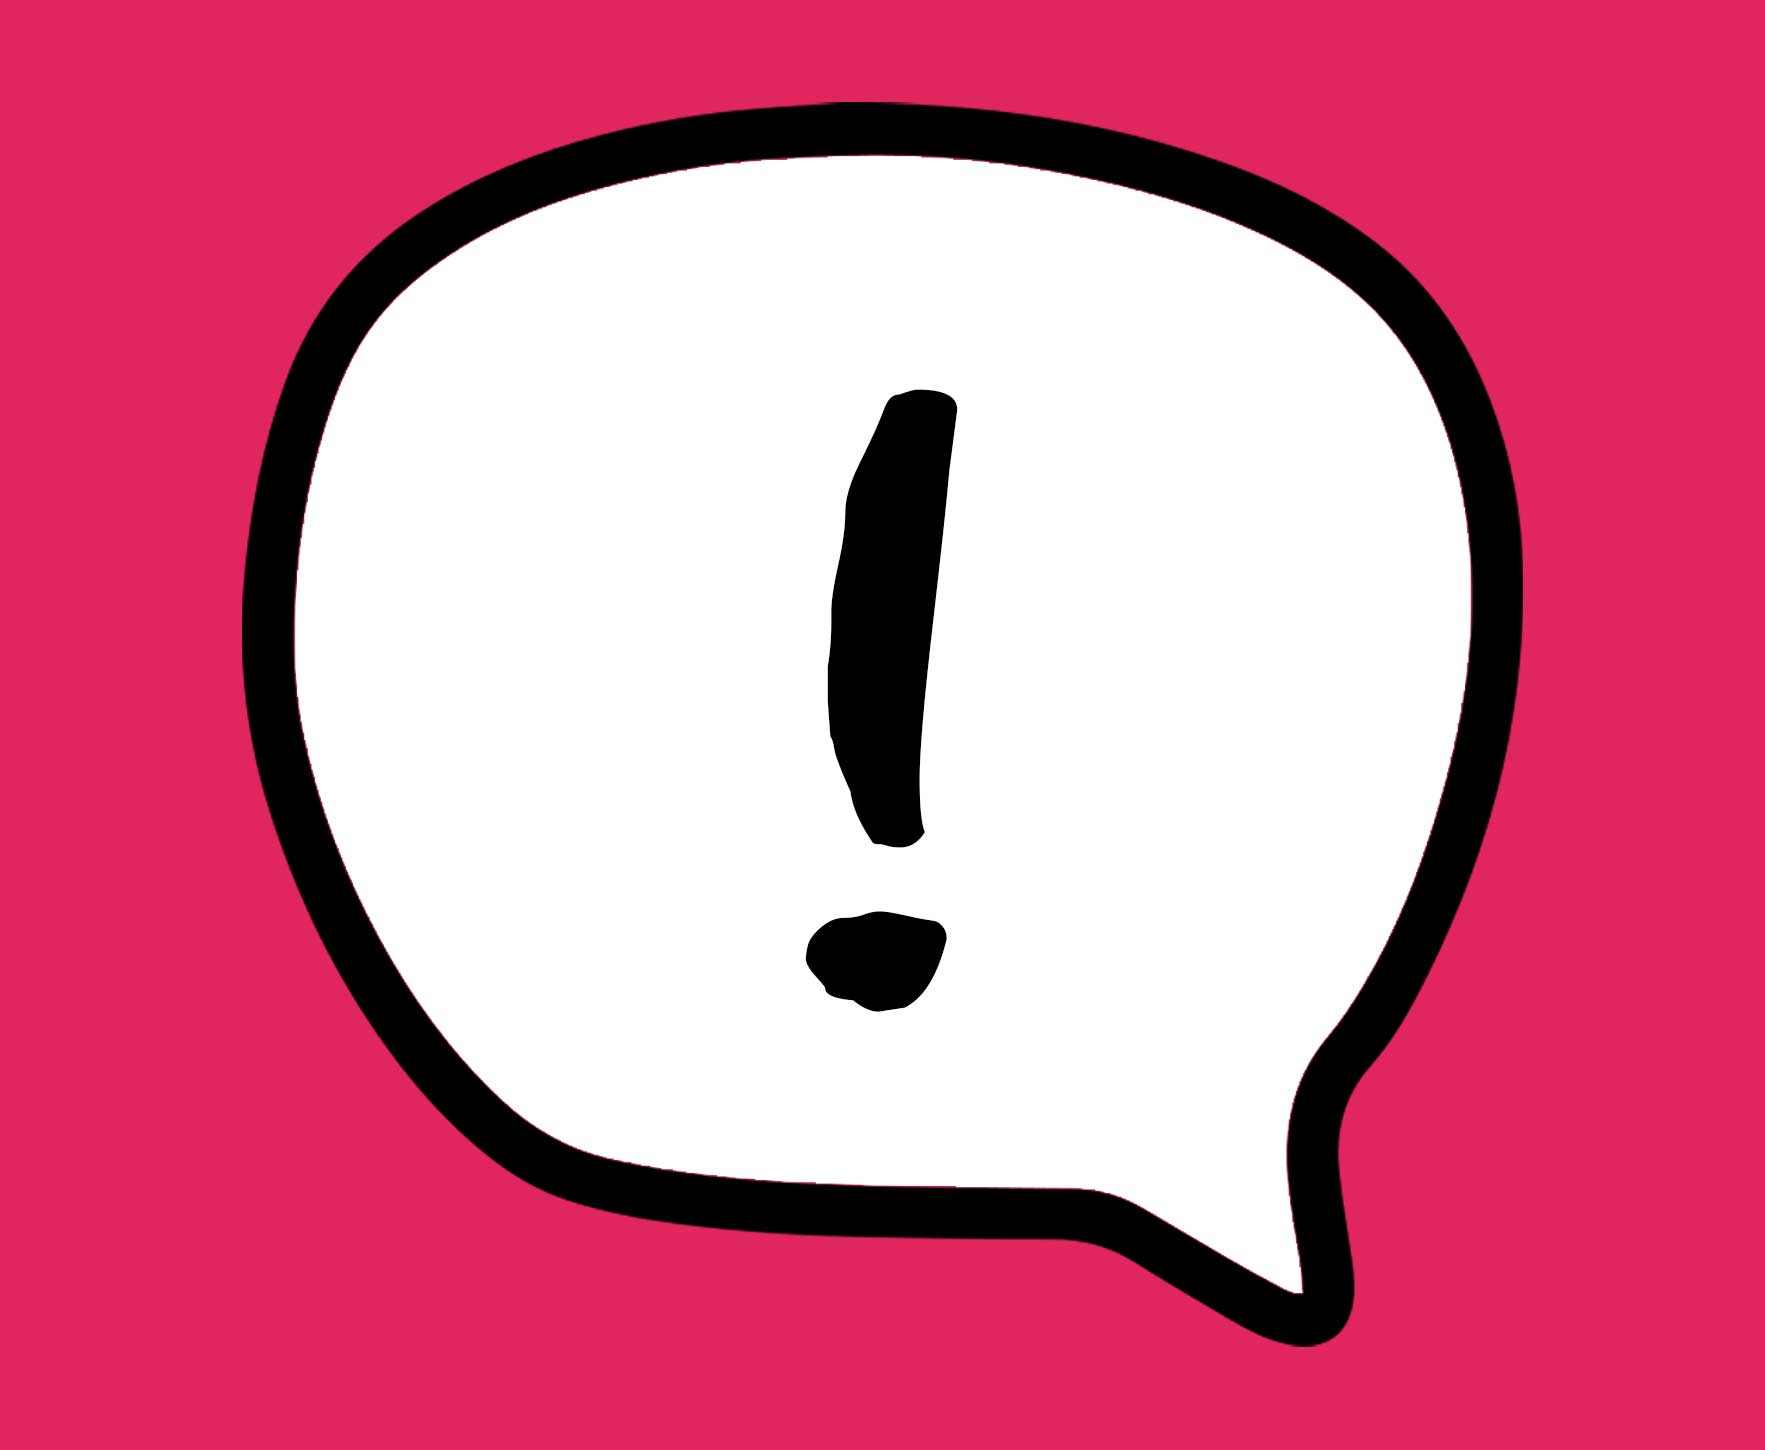 An exclamation mark sits in a speech bubble against a colourful background.